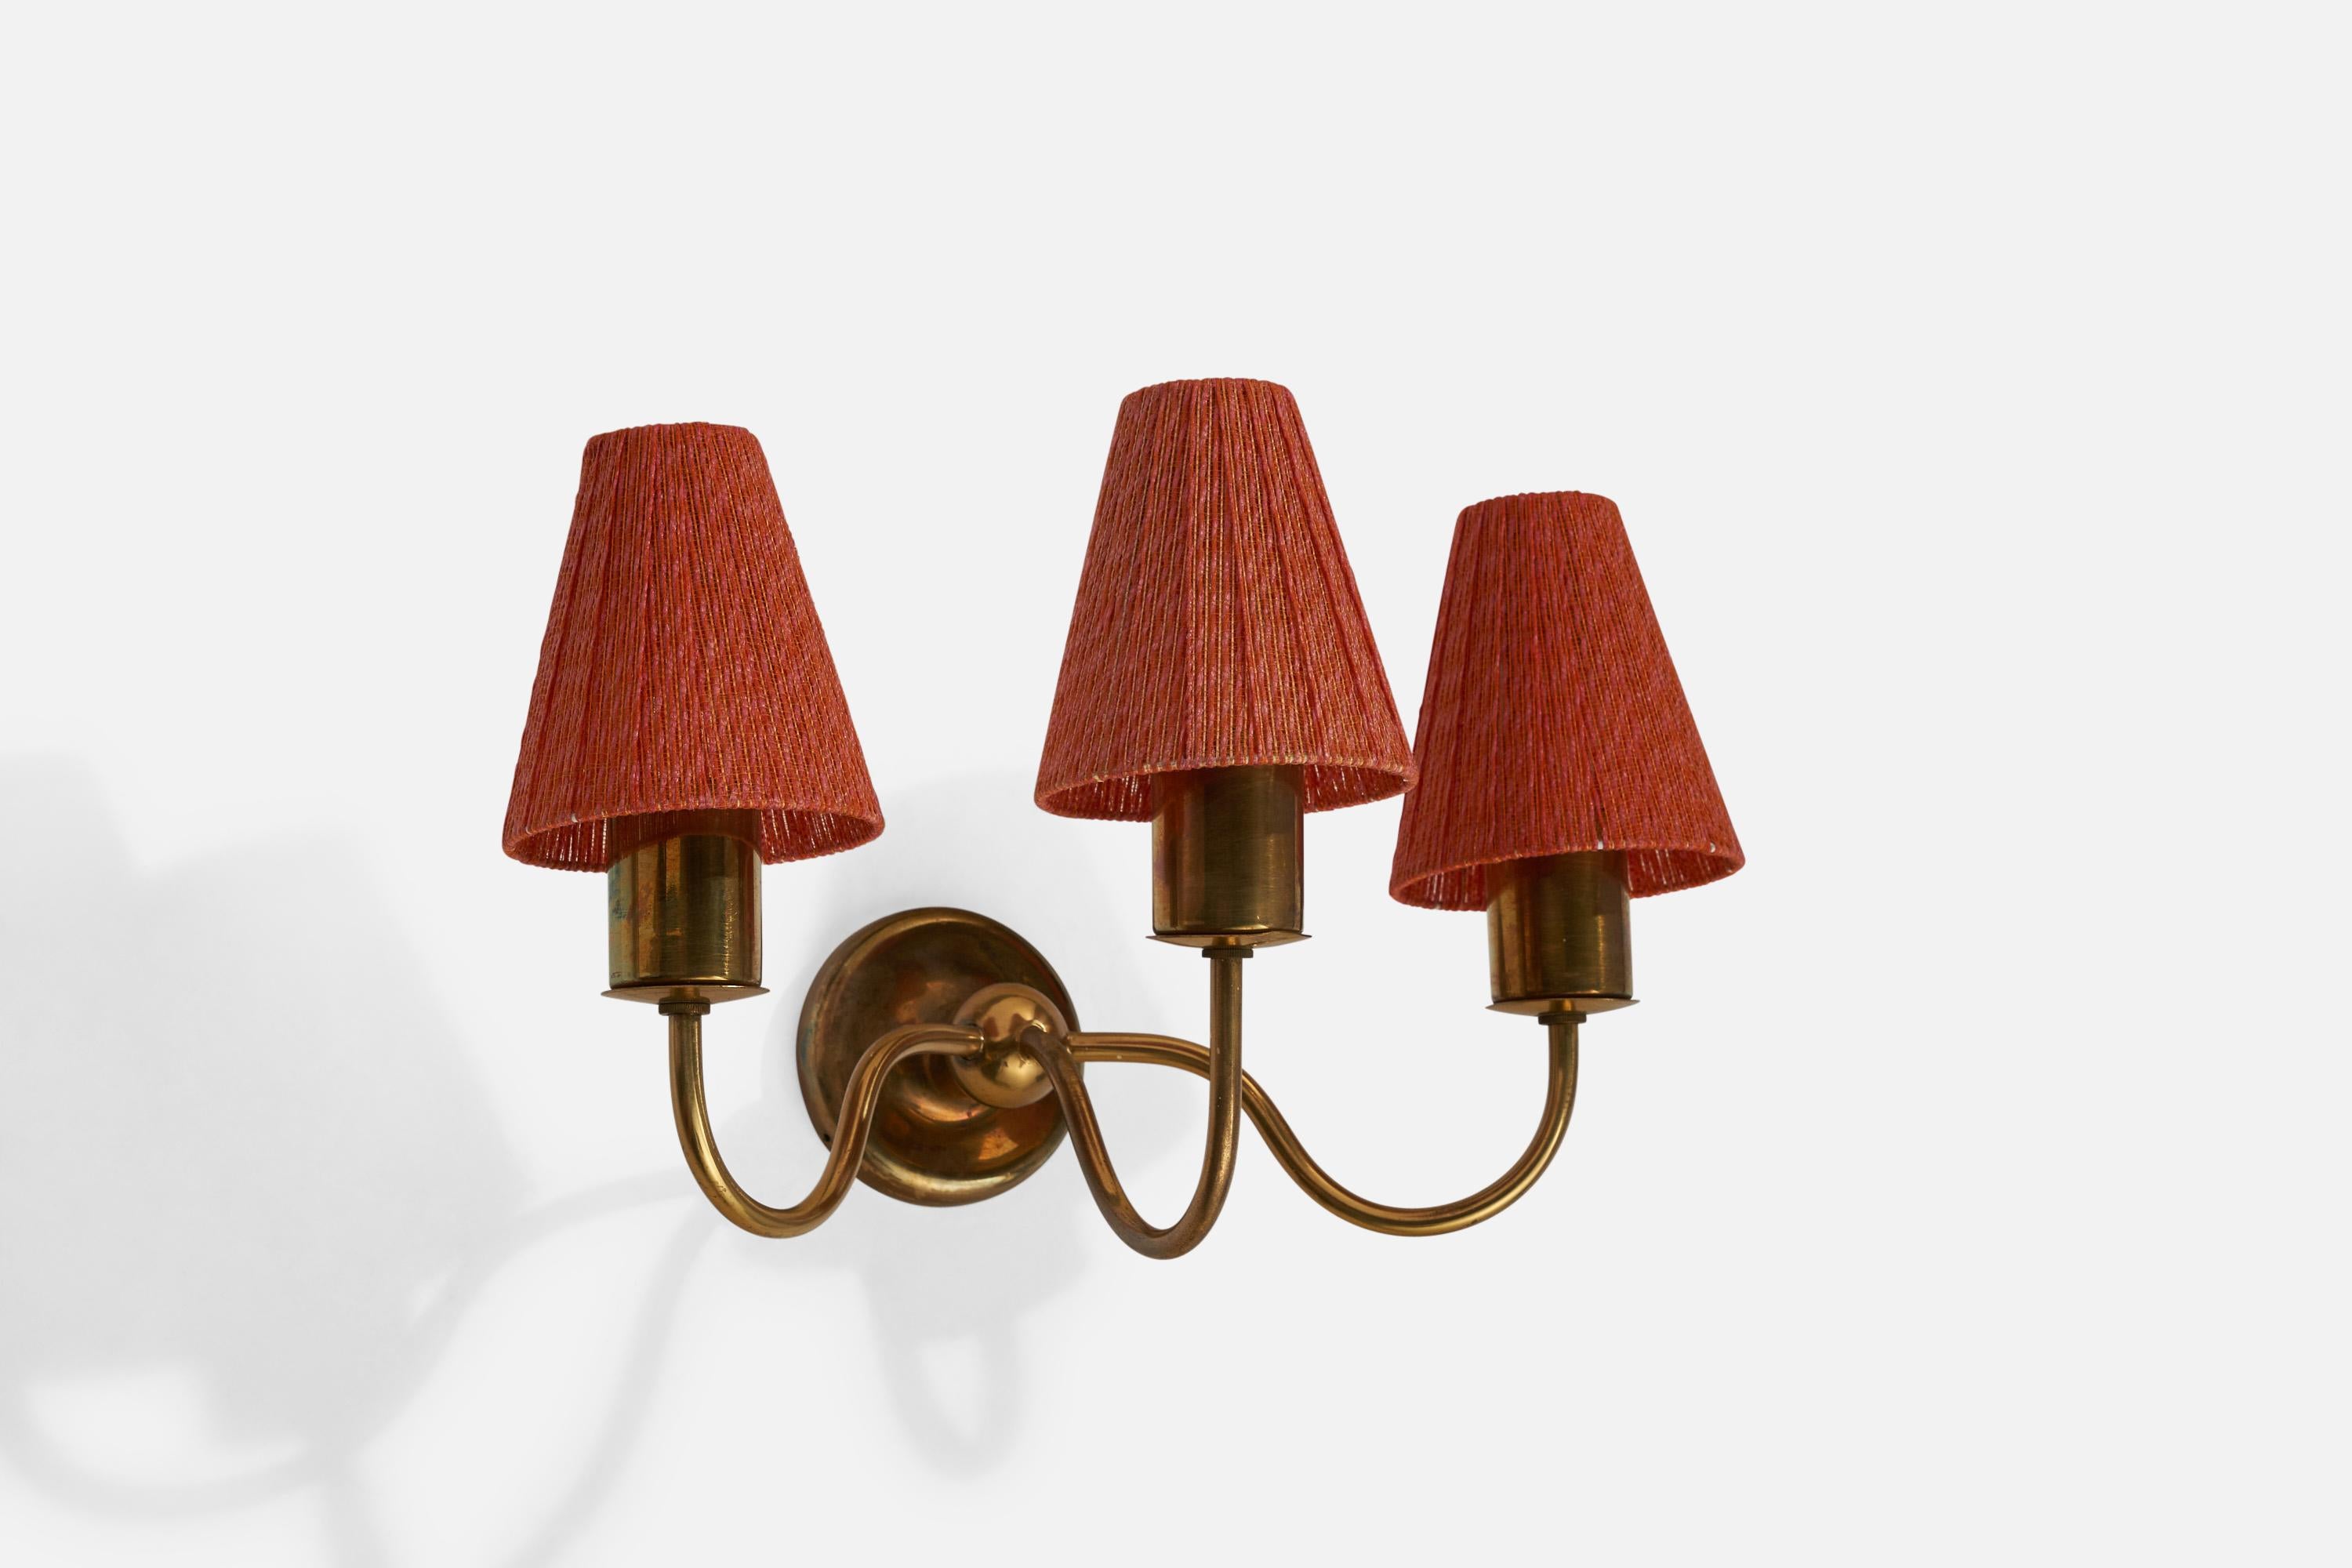 A three-armed brass and red string-fabric wall light designed by Josef Frank and produced by Svenskt Tenn, Sweden, 1940s.

Overall Dimensions (inches): 10.5” H x 15.5” W x 10.5” D
Back Plate Dimensions (inches): 3.75” H x 3.75” W x .75” D
Bulb